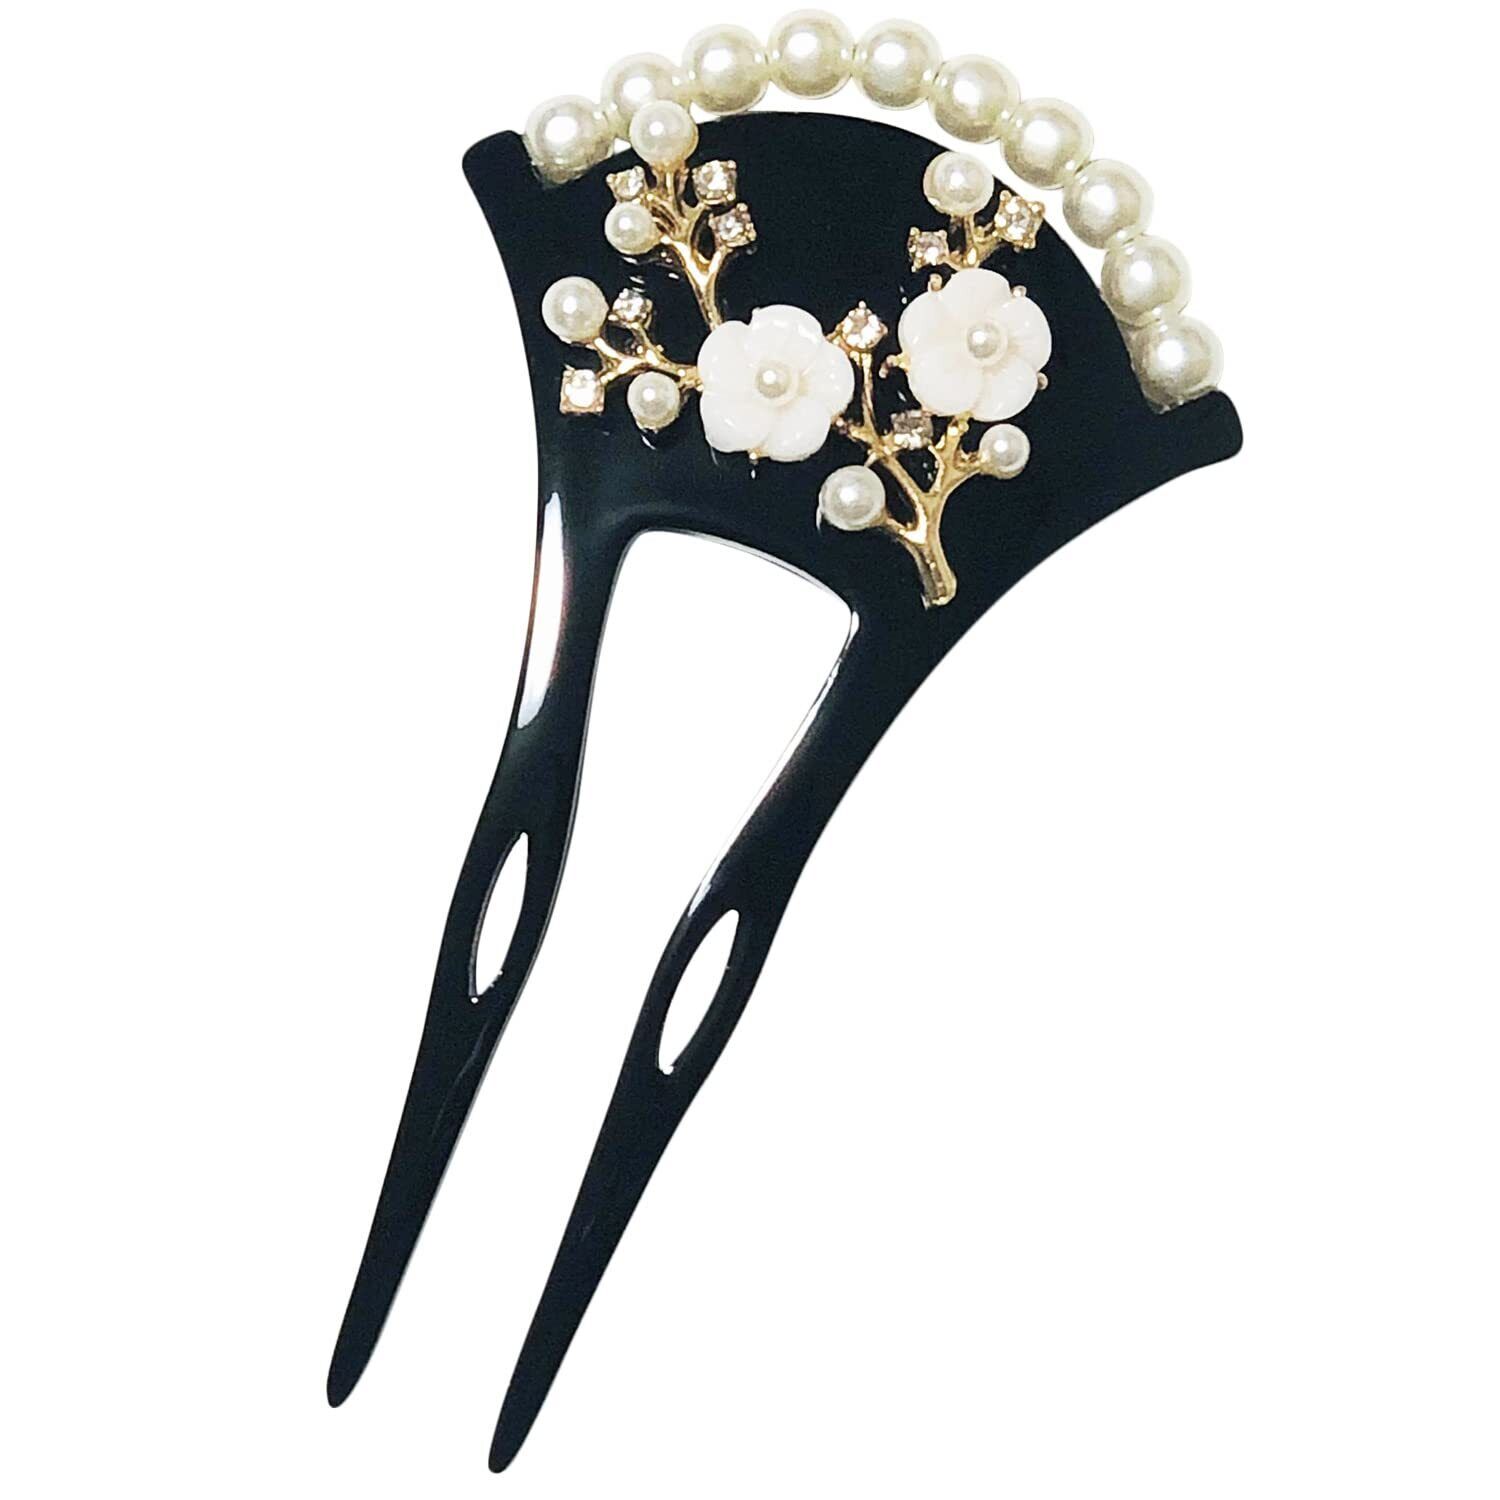 NEW Kanzashi Flower Japanese Hair Ornament Accessory Black Color from Japan